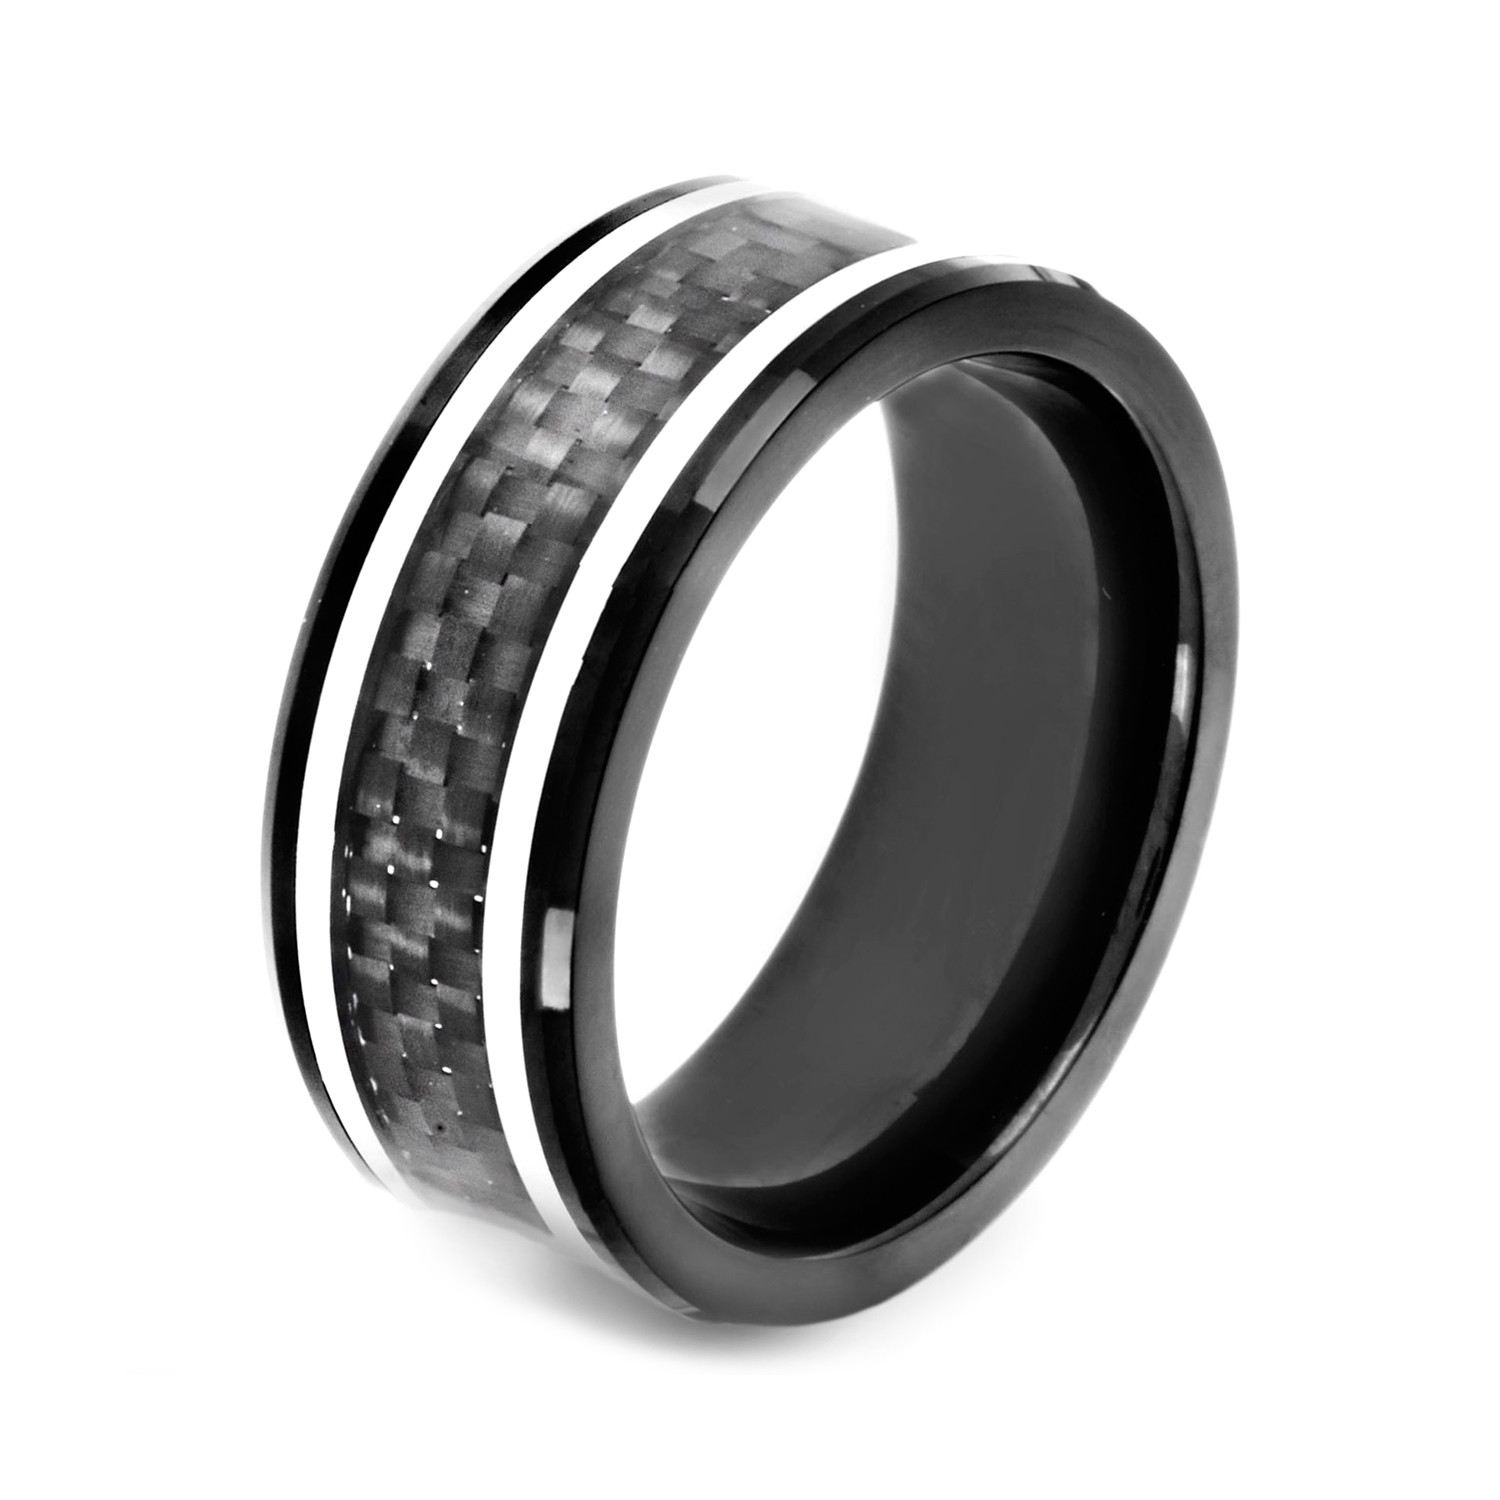 Crucible Blackplated Stainless Steel Carbon Fiber Inlay Ring (Size 8